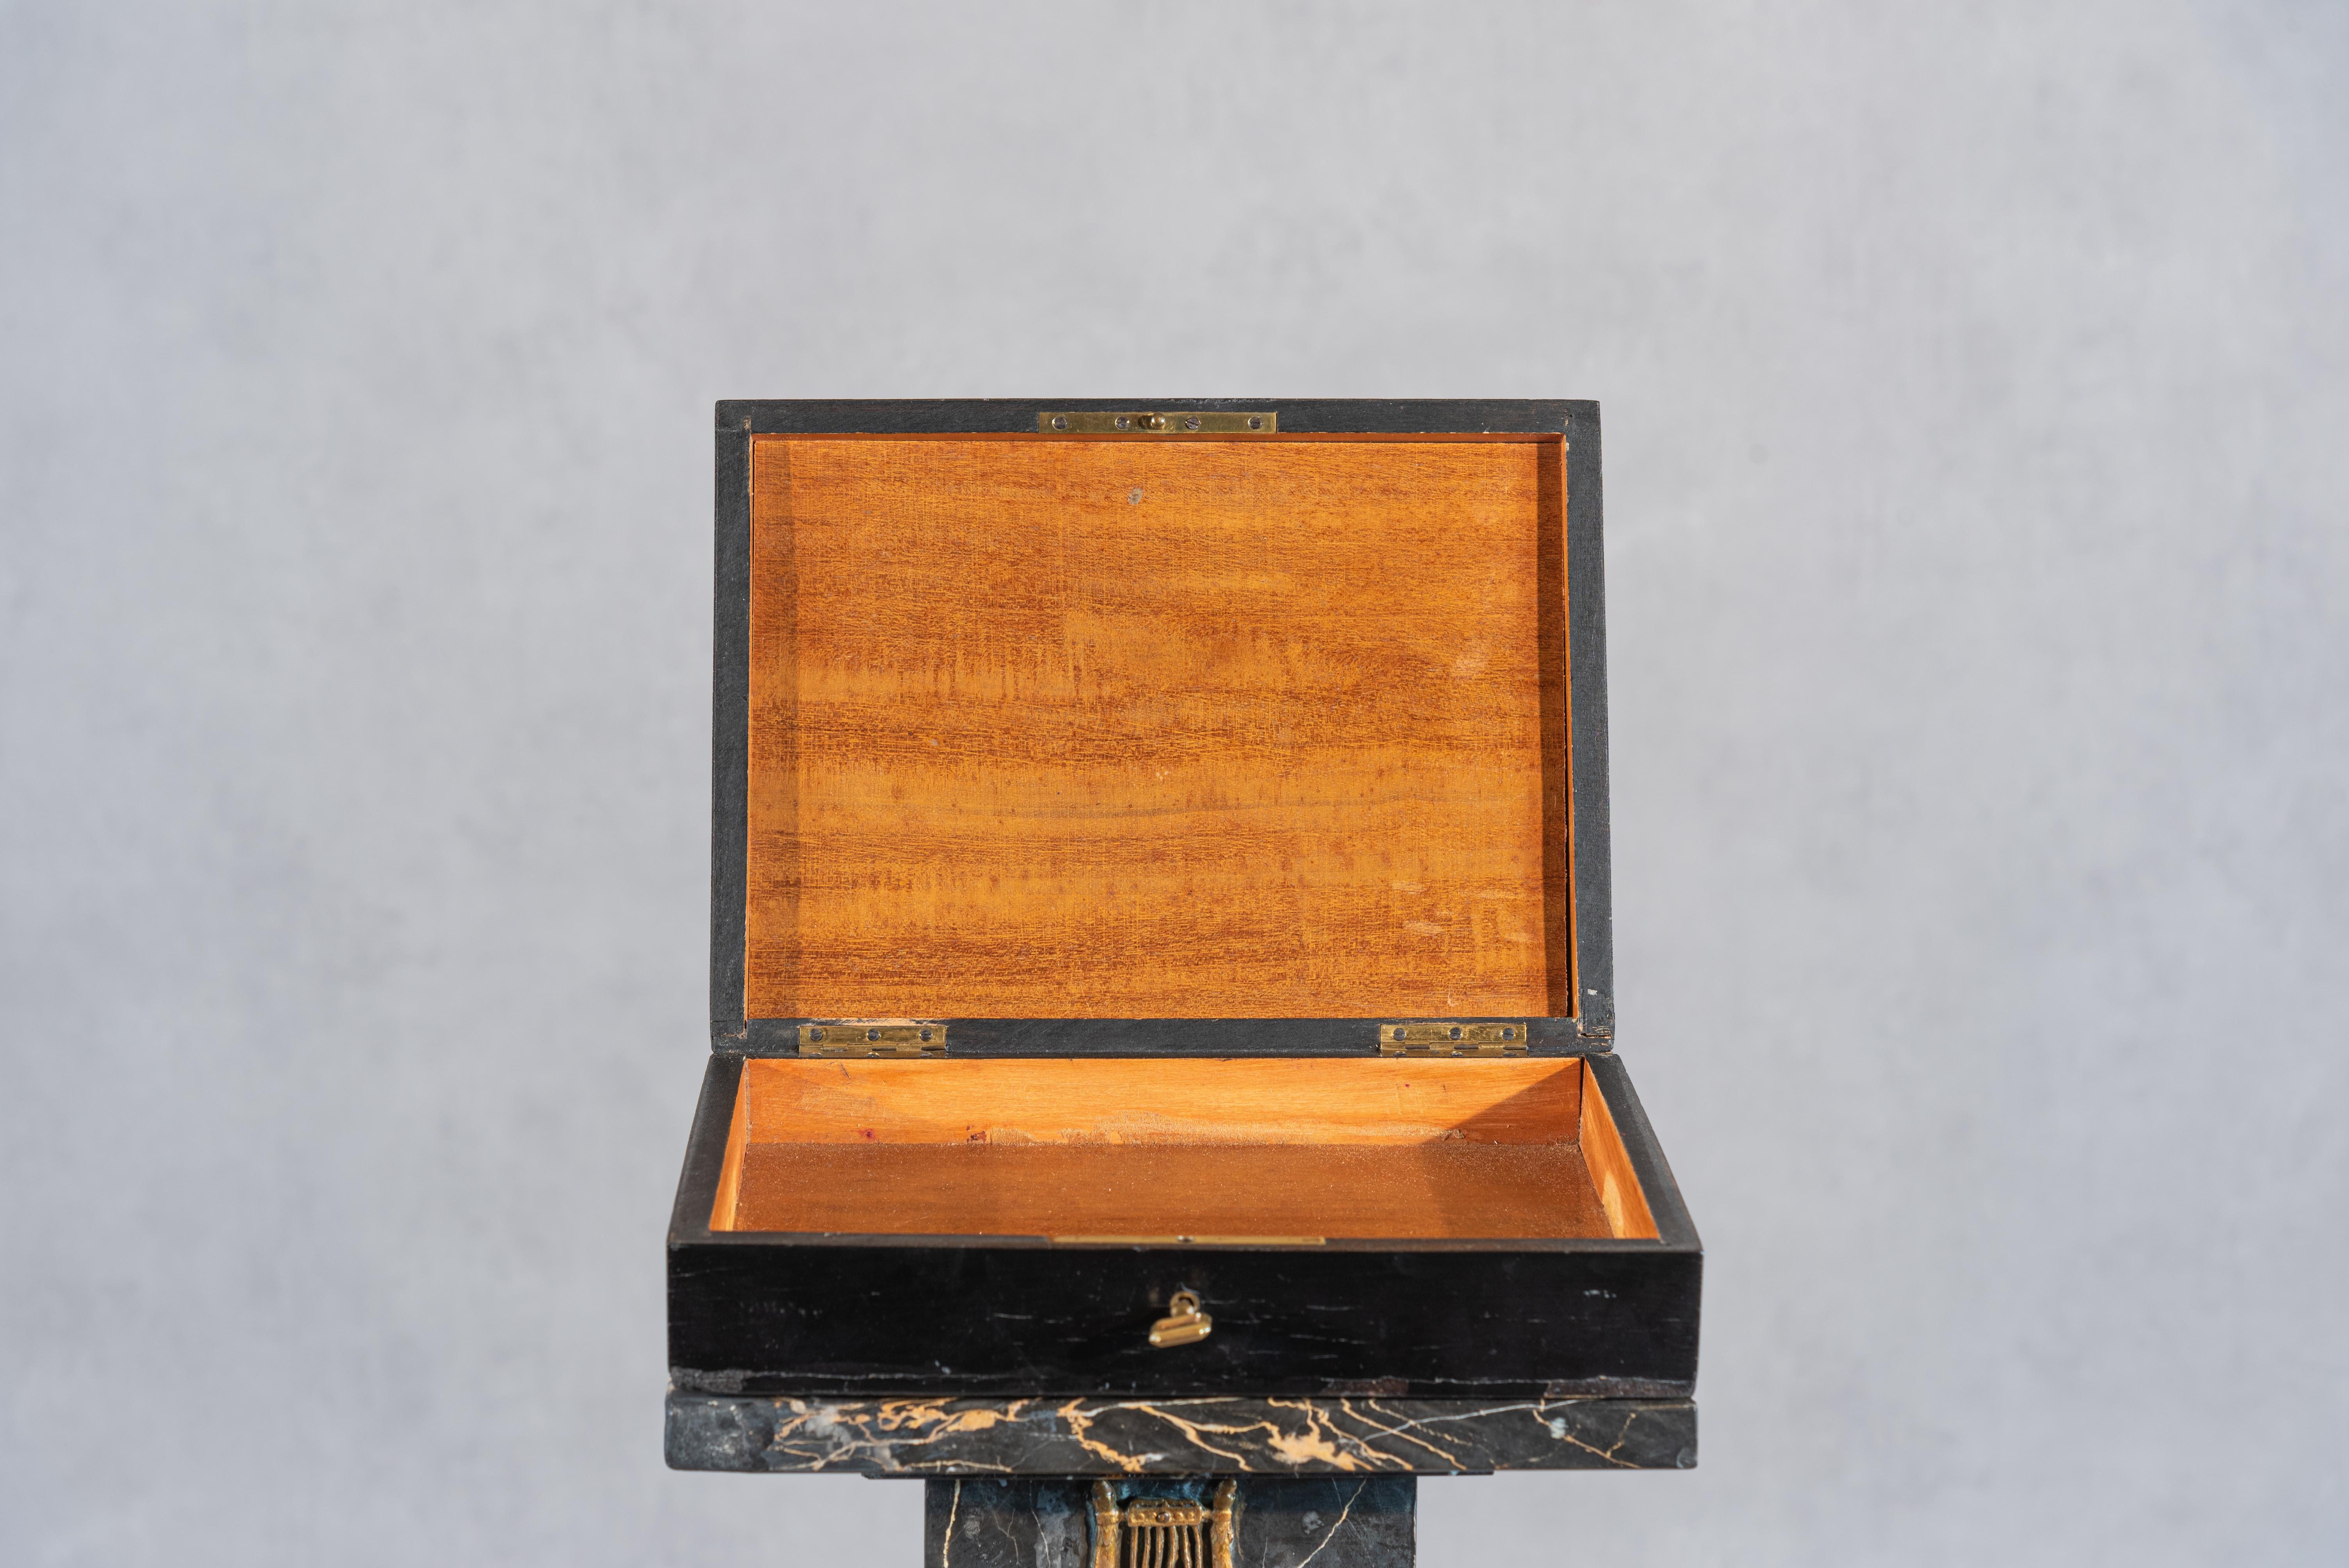 This 19th Century Napoleon III Box is a splendid example of the craftsmanship and elegance characteristic of the Napoleon III era. Crafted from rich black walnut wood and adorned with intricate brass detailing, the box exudes a sense of opulence and